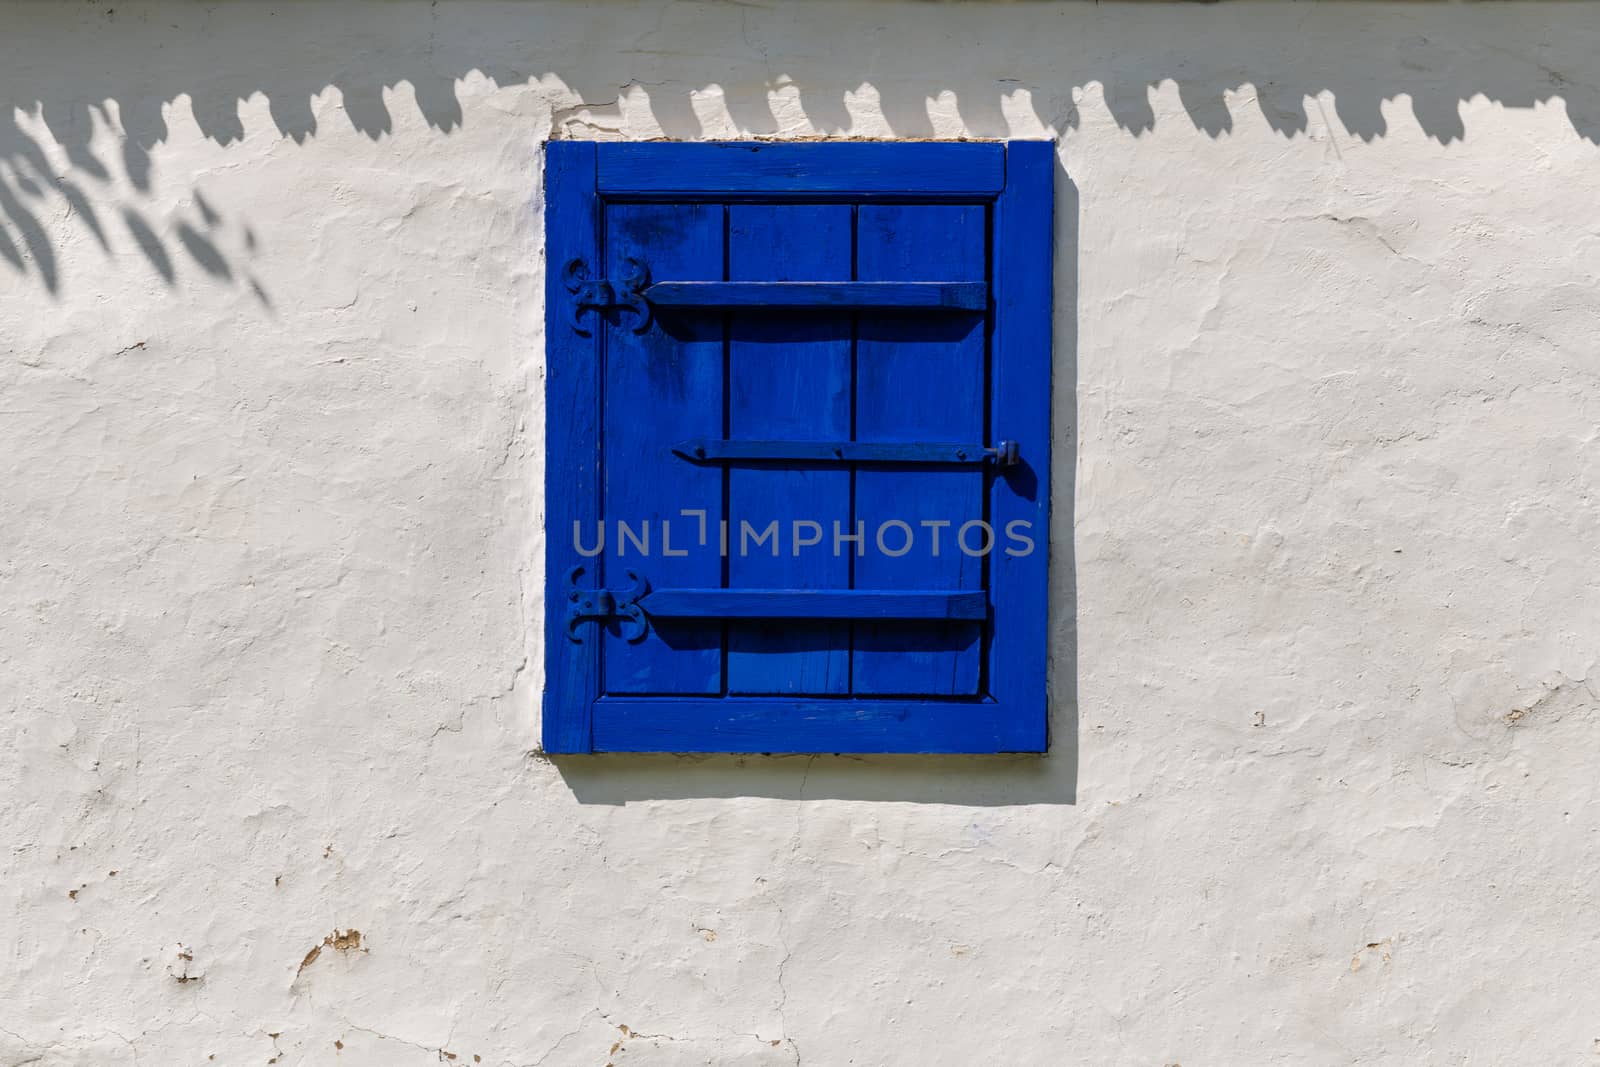 Detail of a traditional village window in Romania painted in strident blue on a white mud wall background.